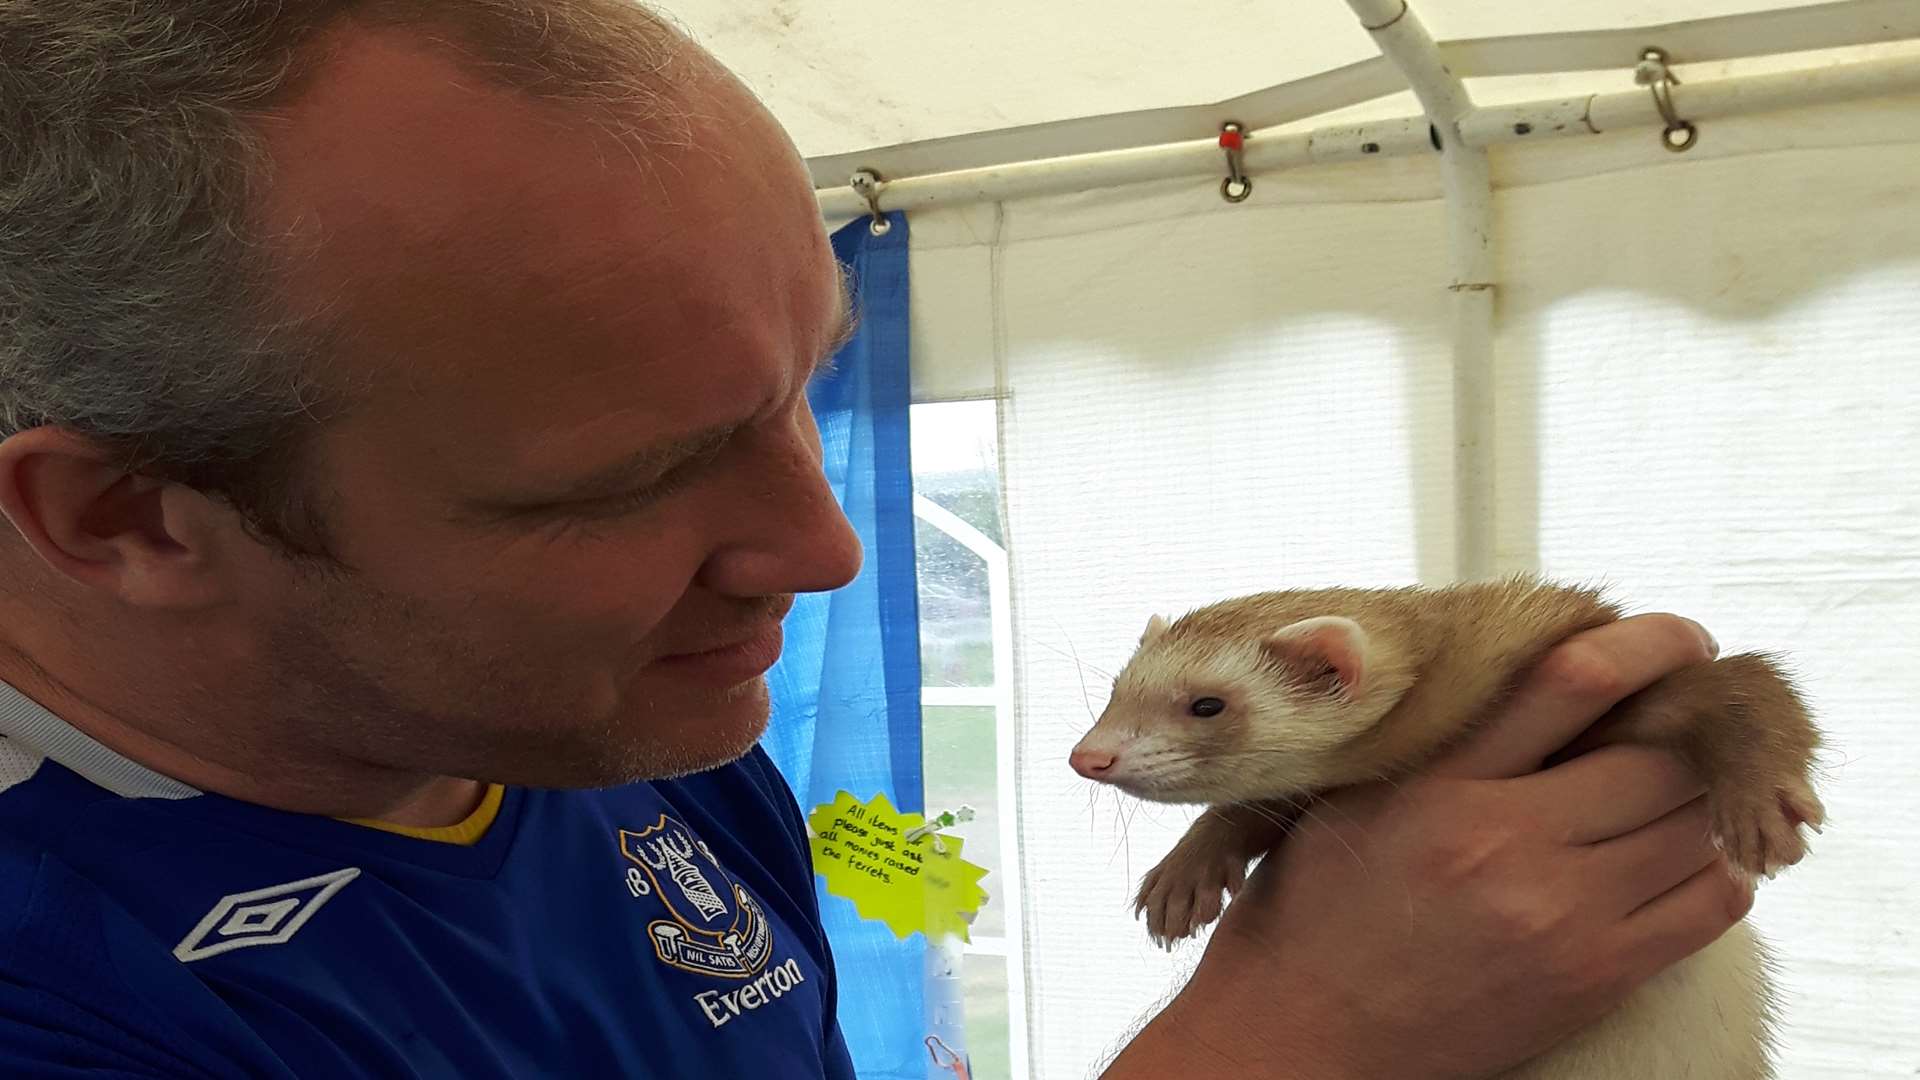 Barry Hadlow gets up close and personal to Pepper the ferret.